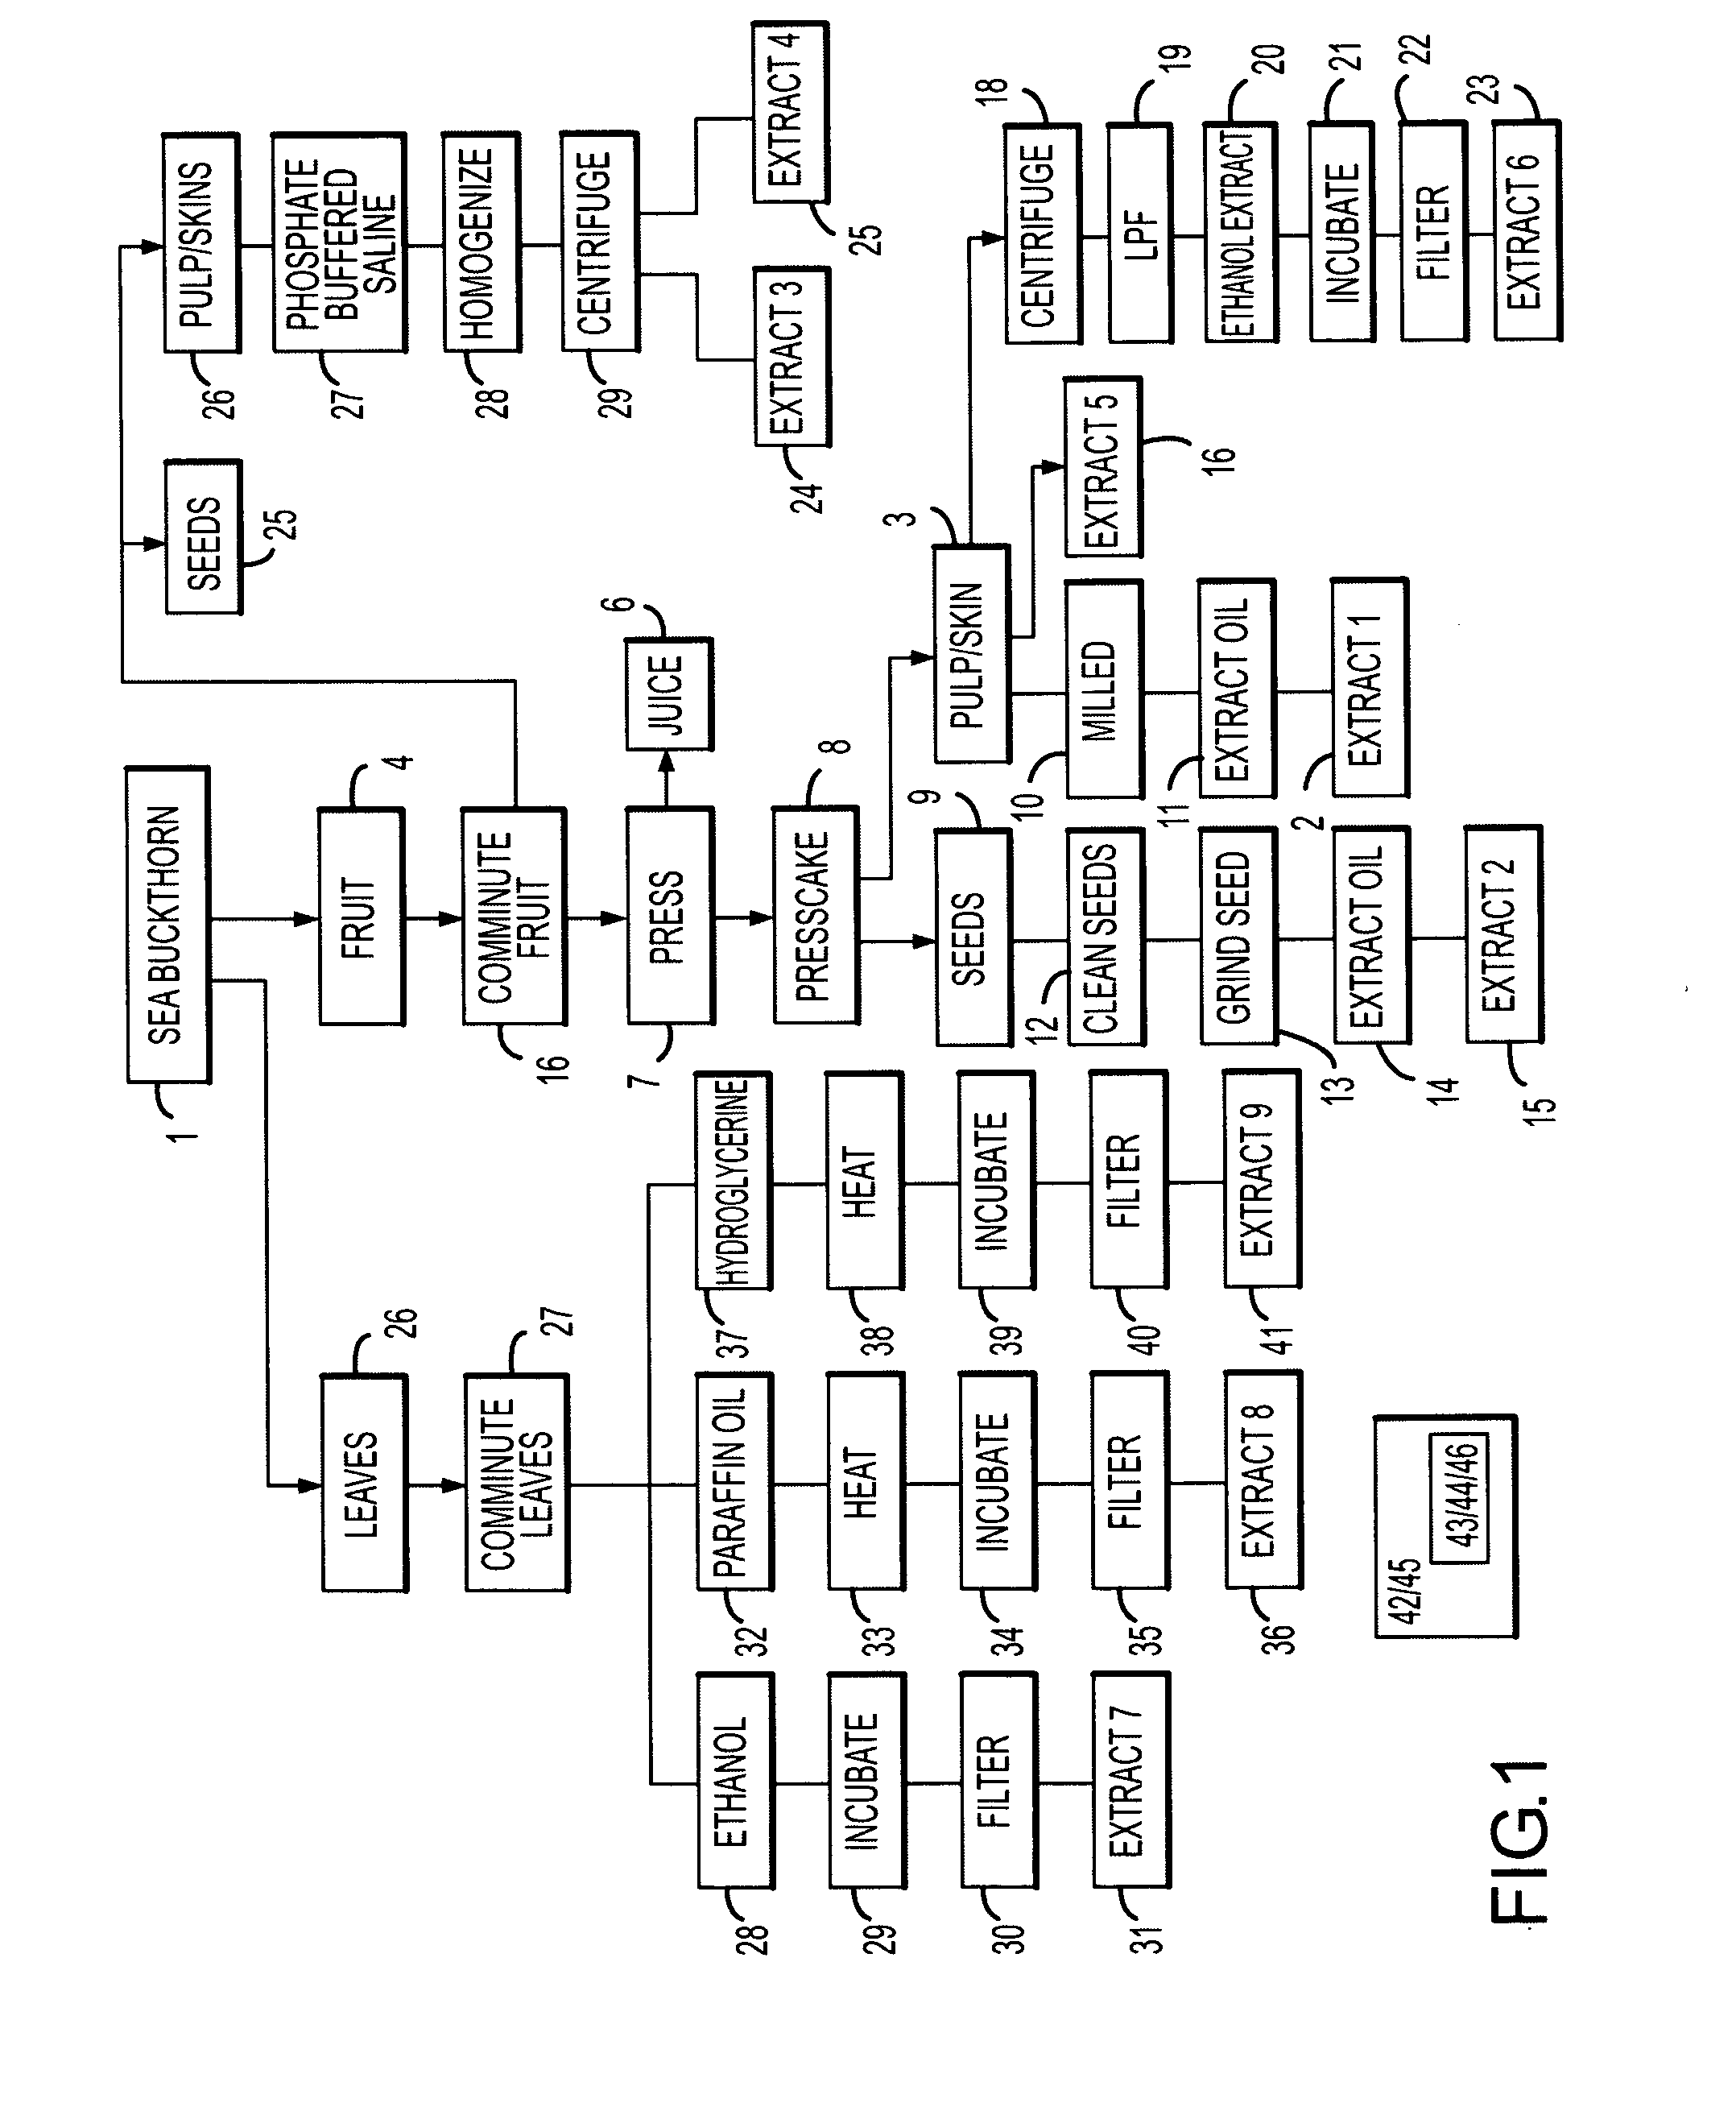 Reproductive cell maintenance system